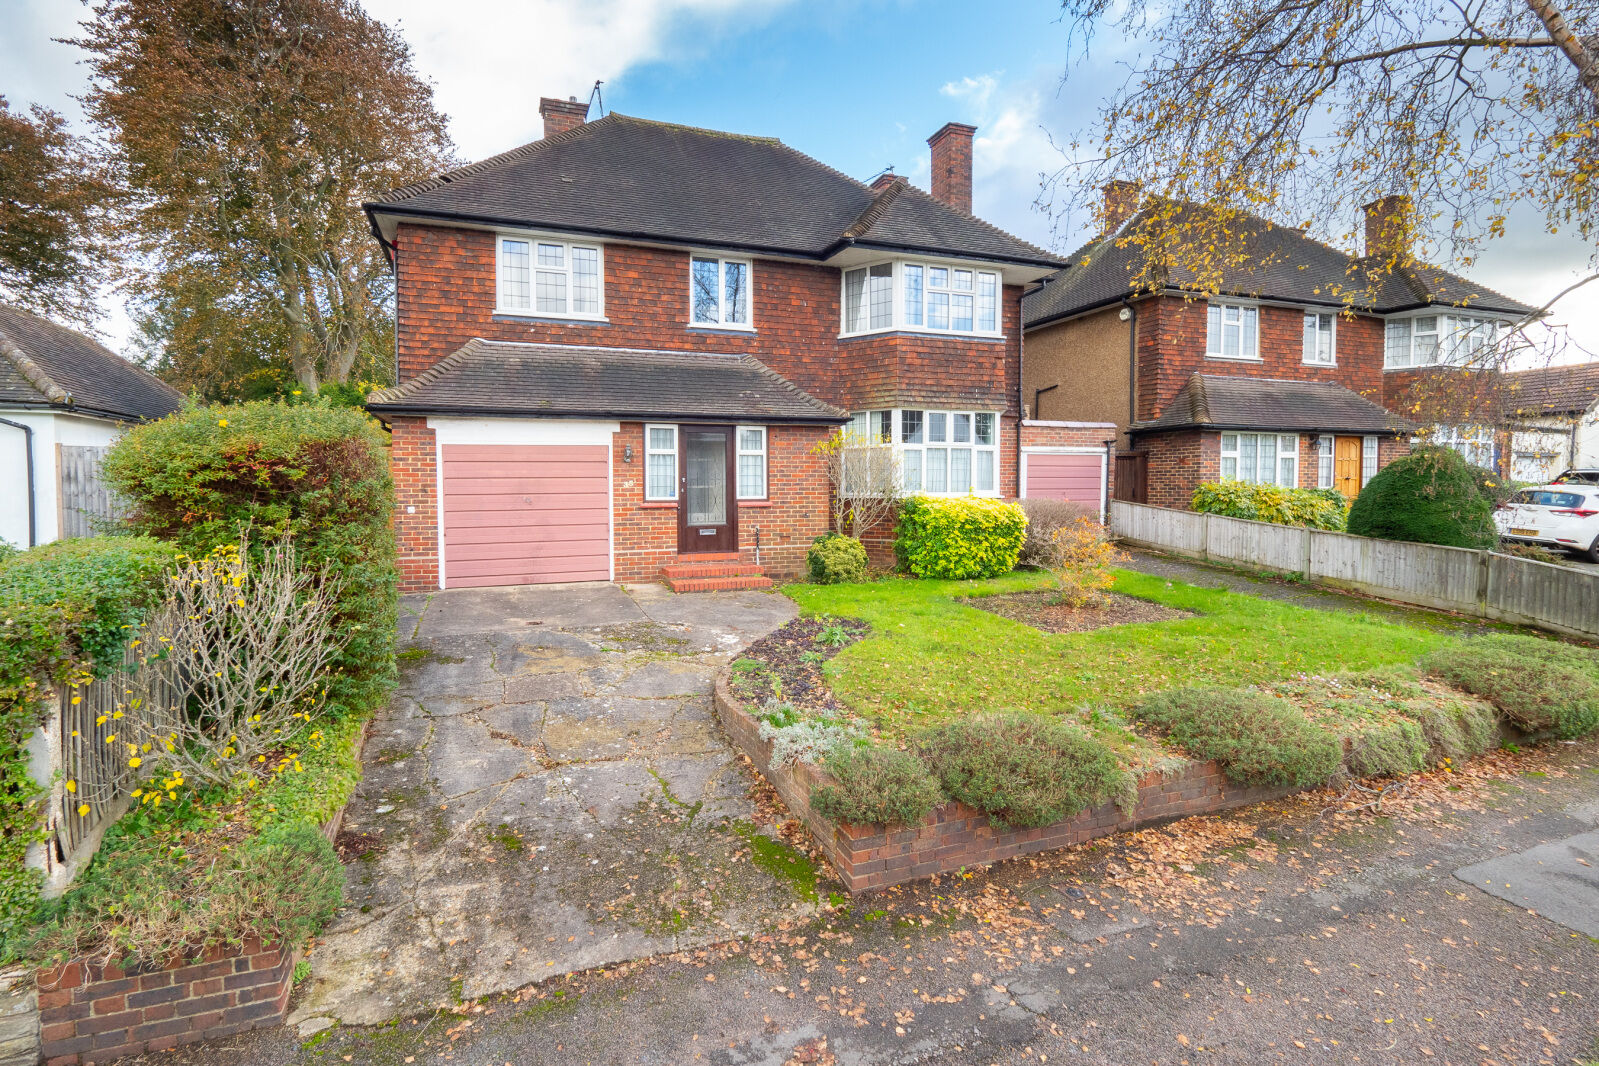 4 bedroom detached house for sale Cornwall Road, Cheam, SM2, main image